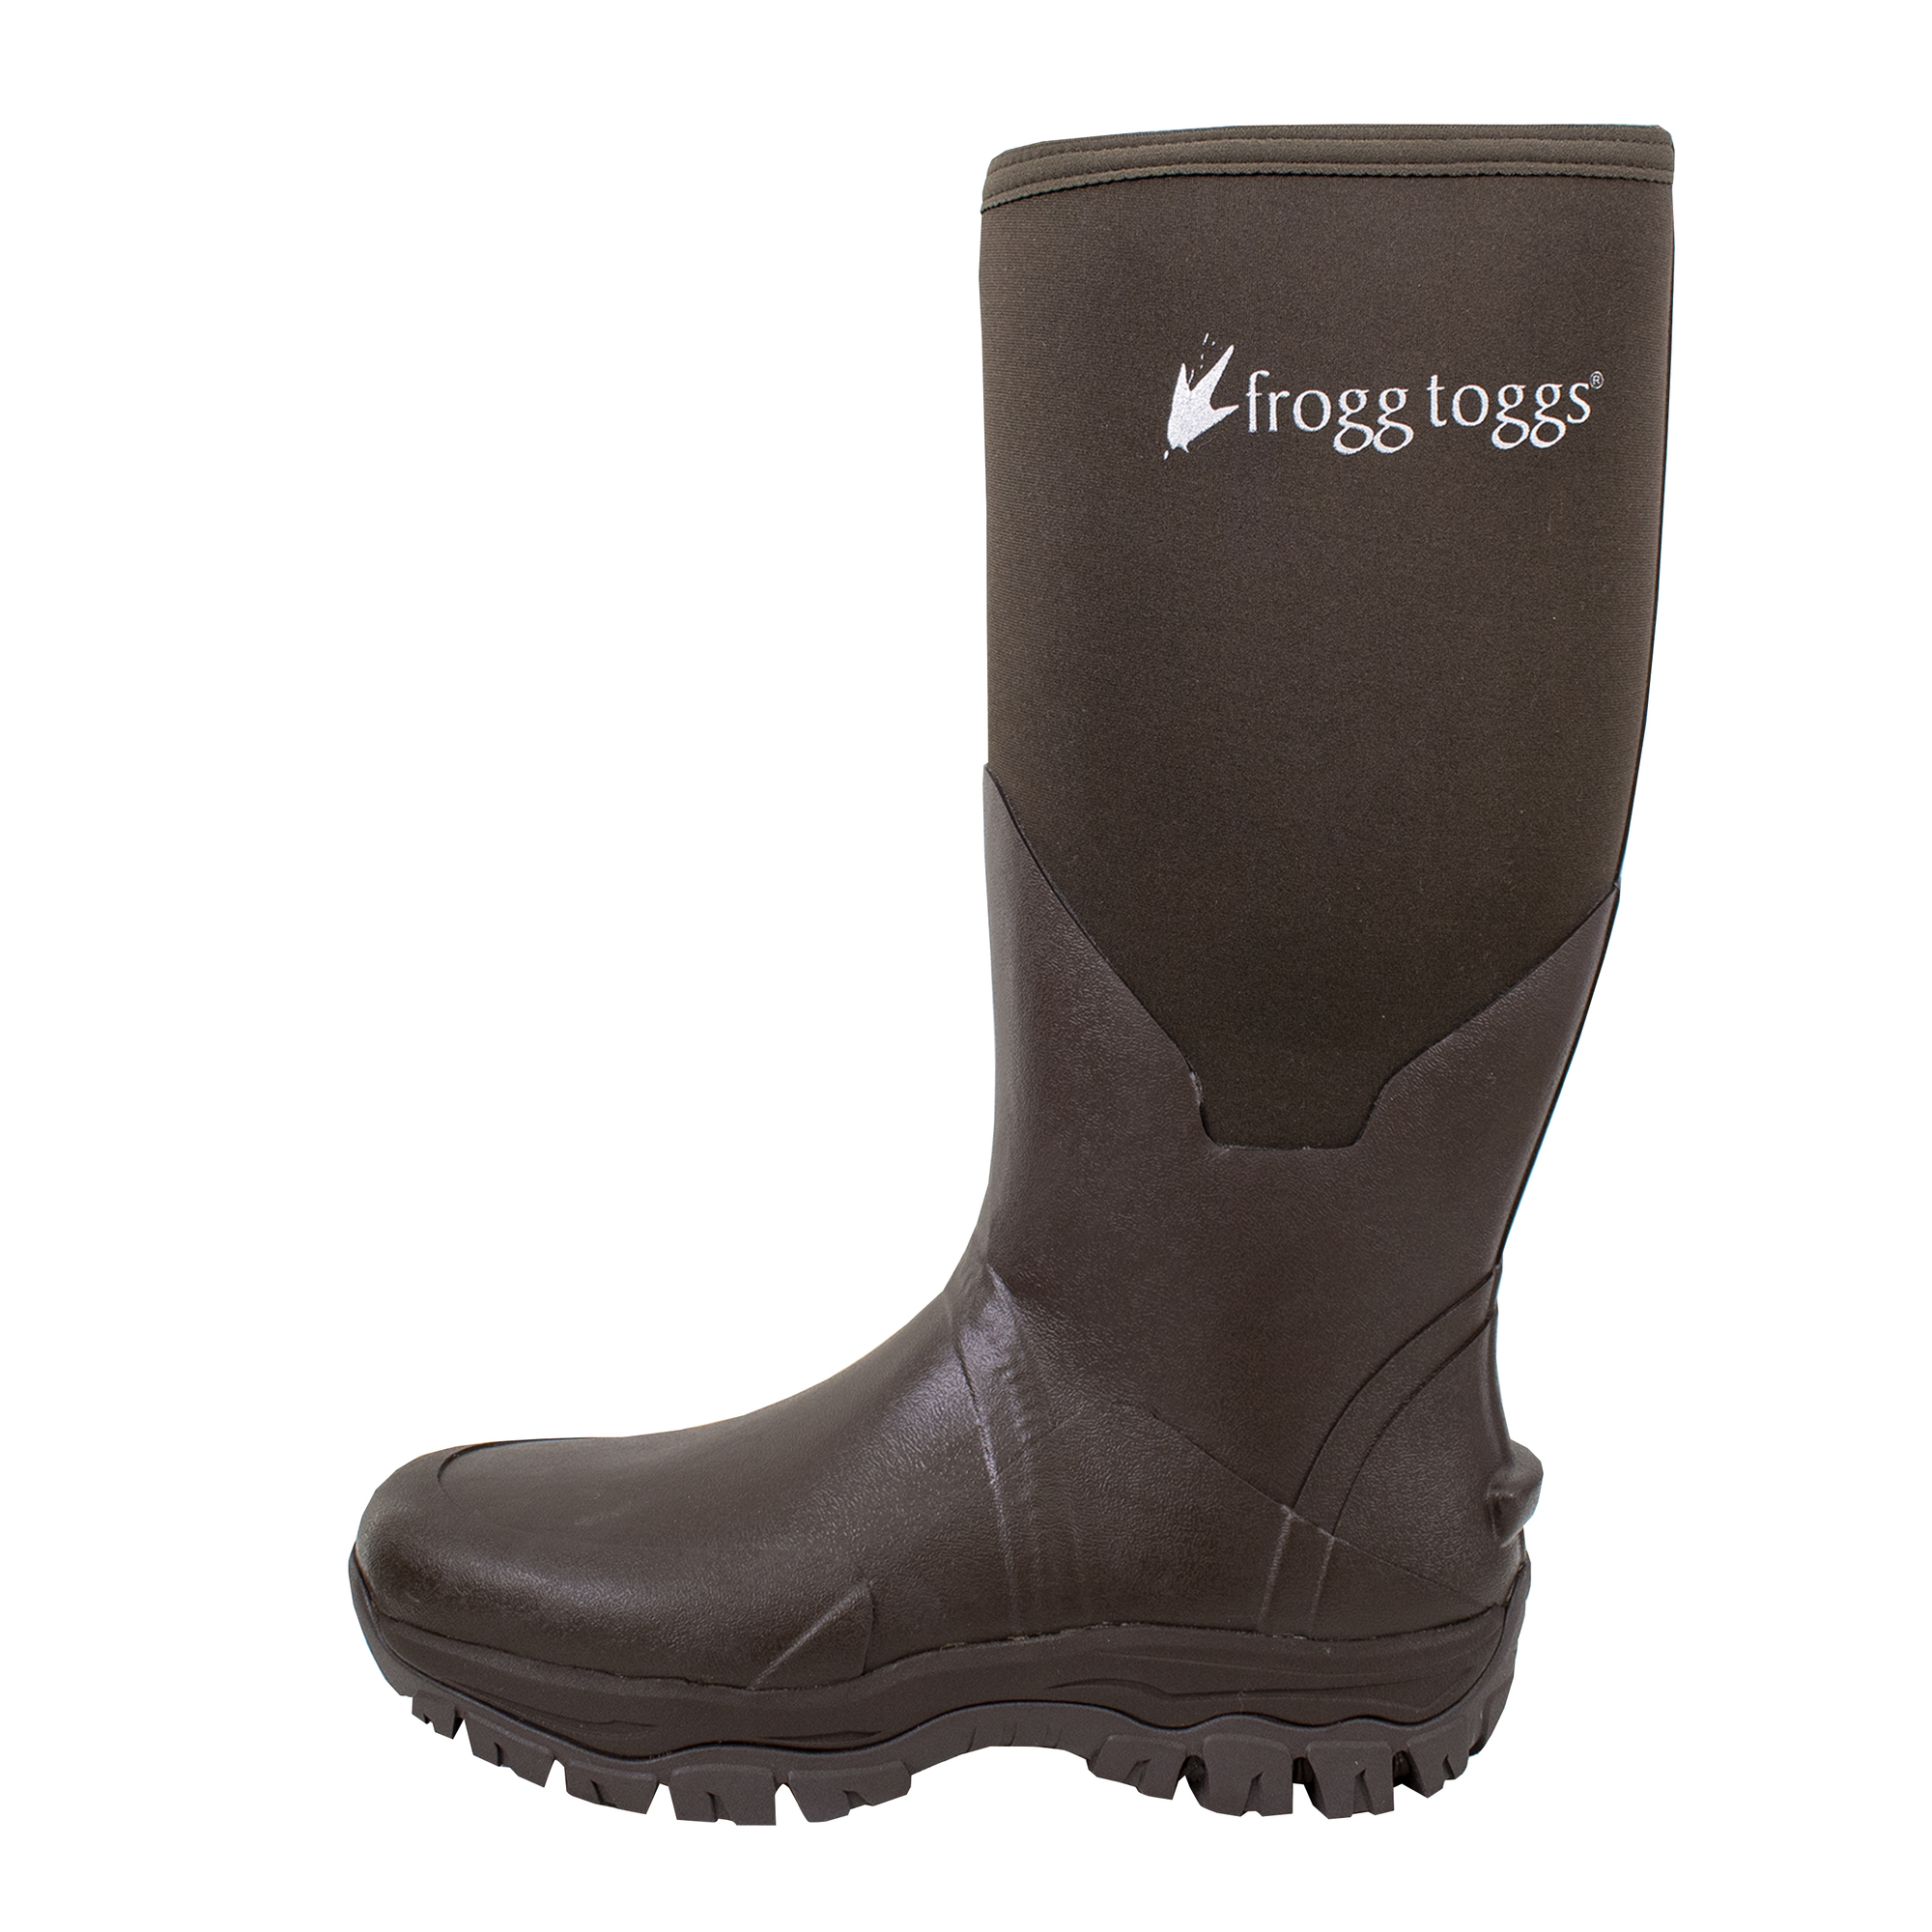 Frogg Toggs Men's Ridge Buster Knee Boots, Brown, 9